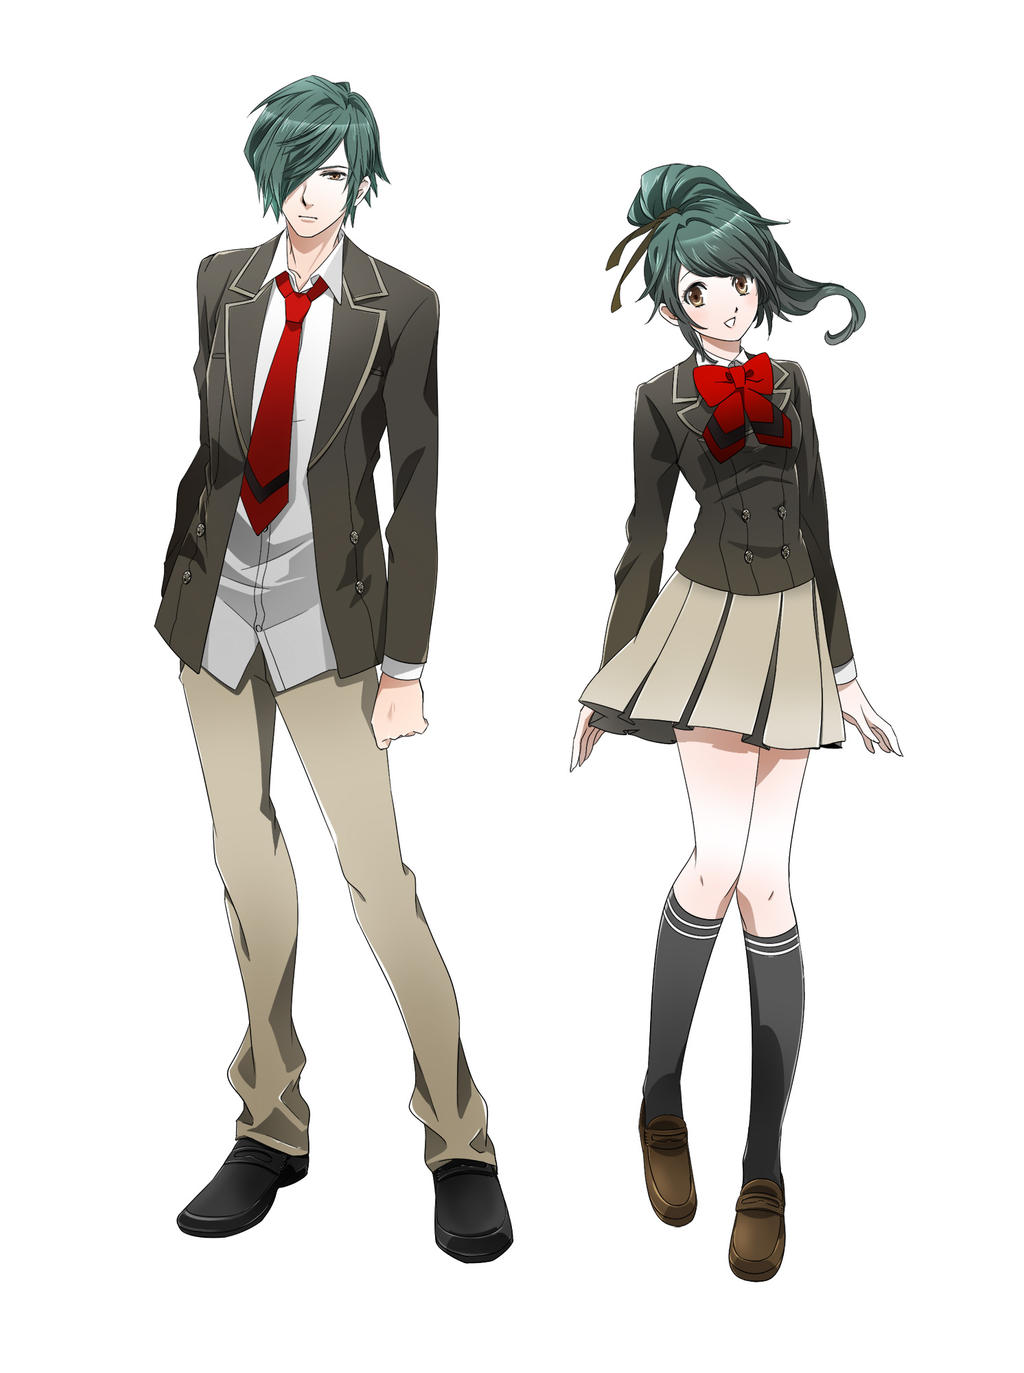 anime_style_male_and_female_school_student_by_animerious-d6e3jzz.jpg